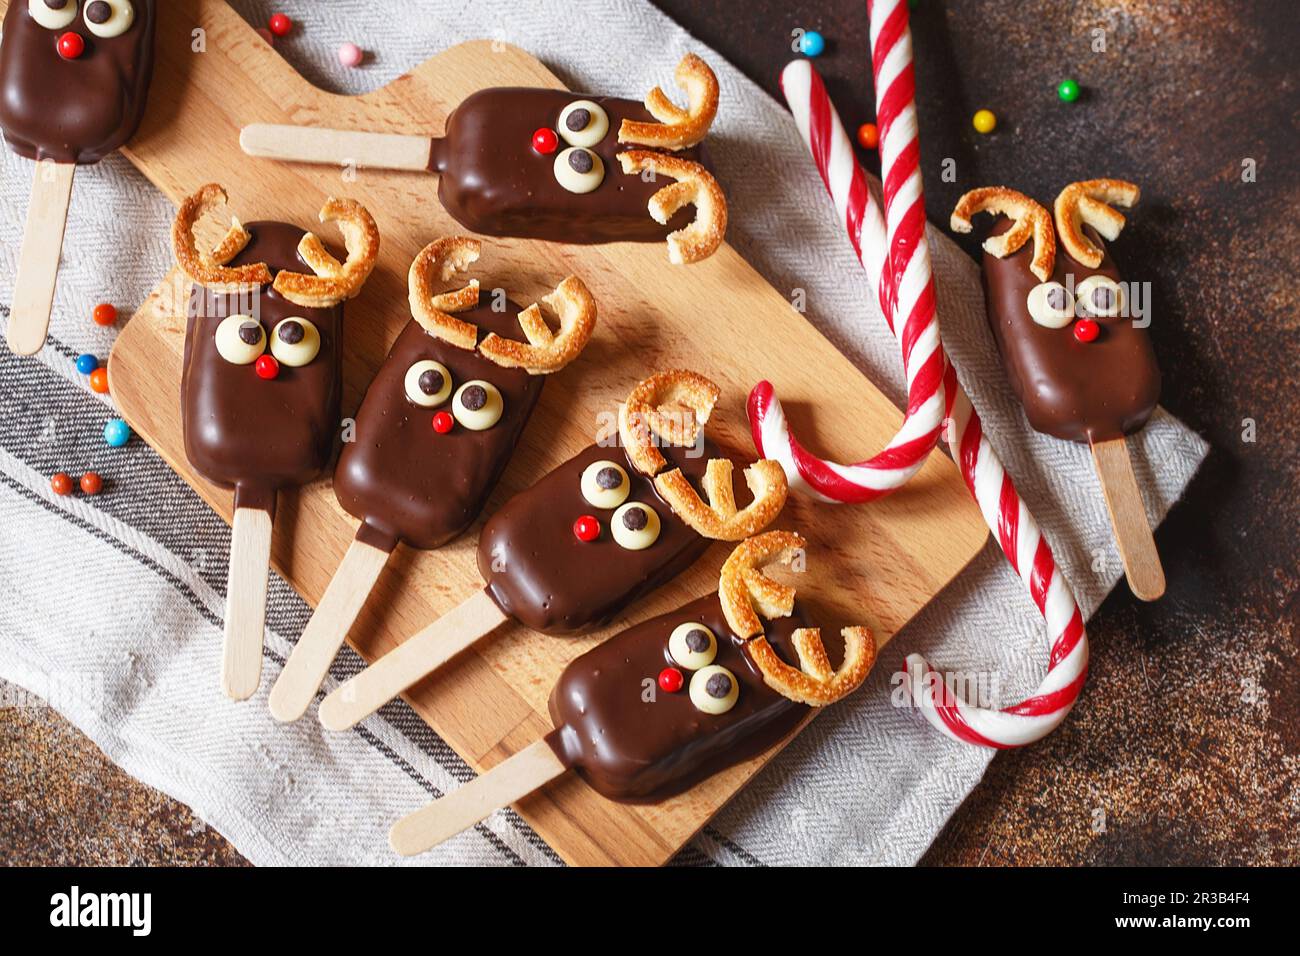 Chocolate popsicle. Christmas concept. Chocolate ice cream on a stick with a Christmas deer face wit Stock Photo